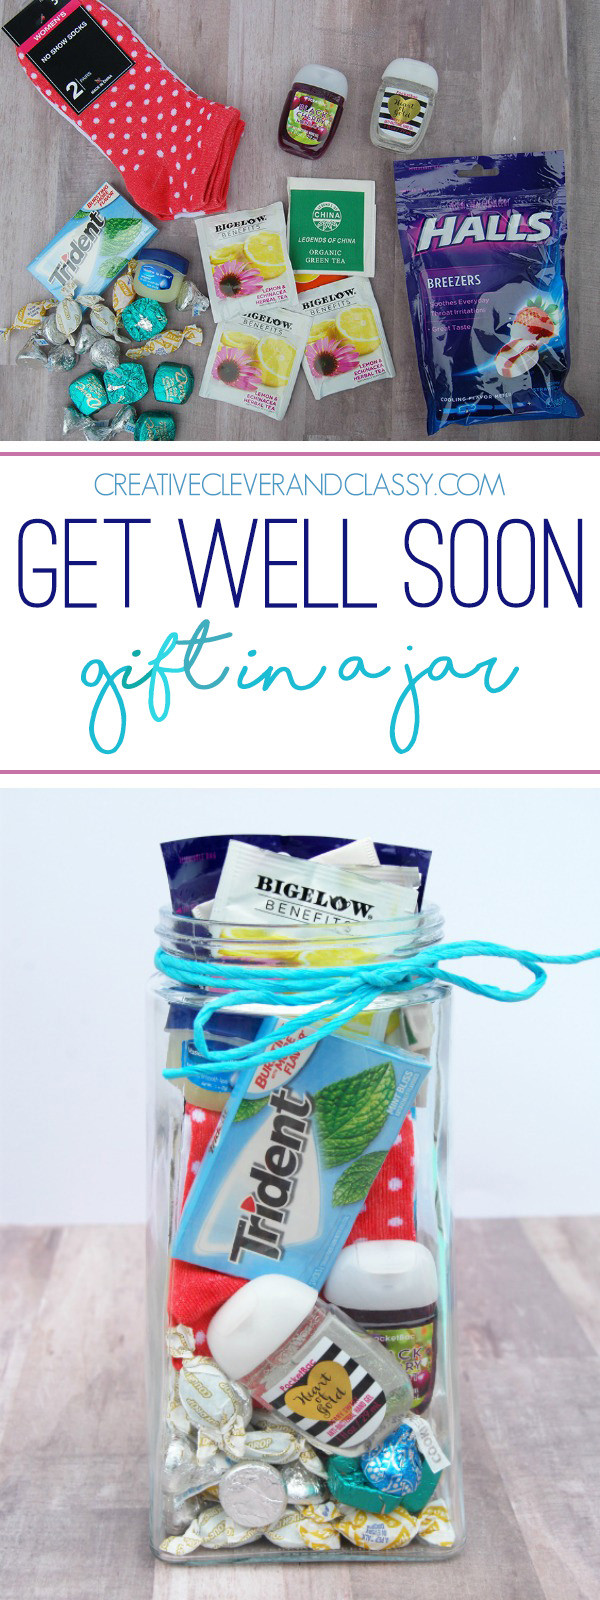 DIY Get Well Gifts
 Easy DIY Get Well Soon Gift in a Jar Gift Idea